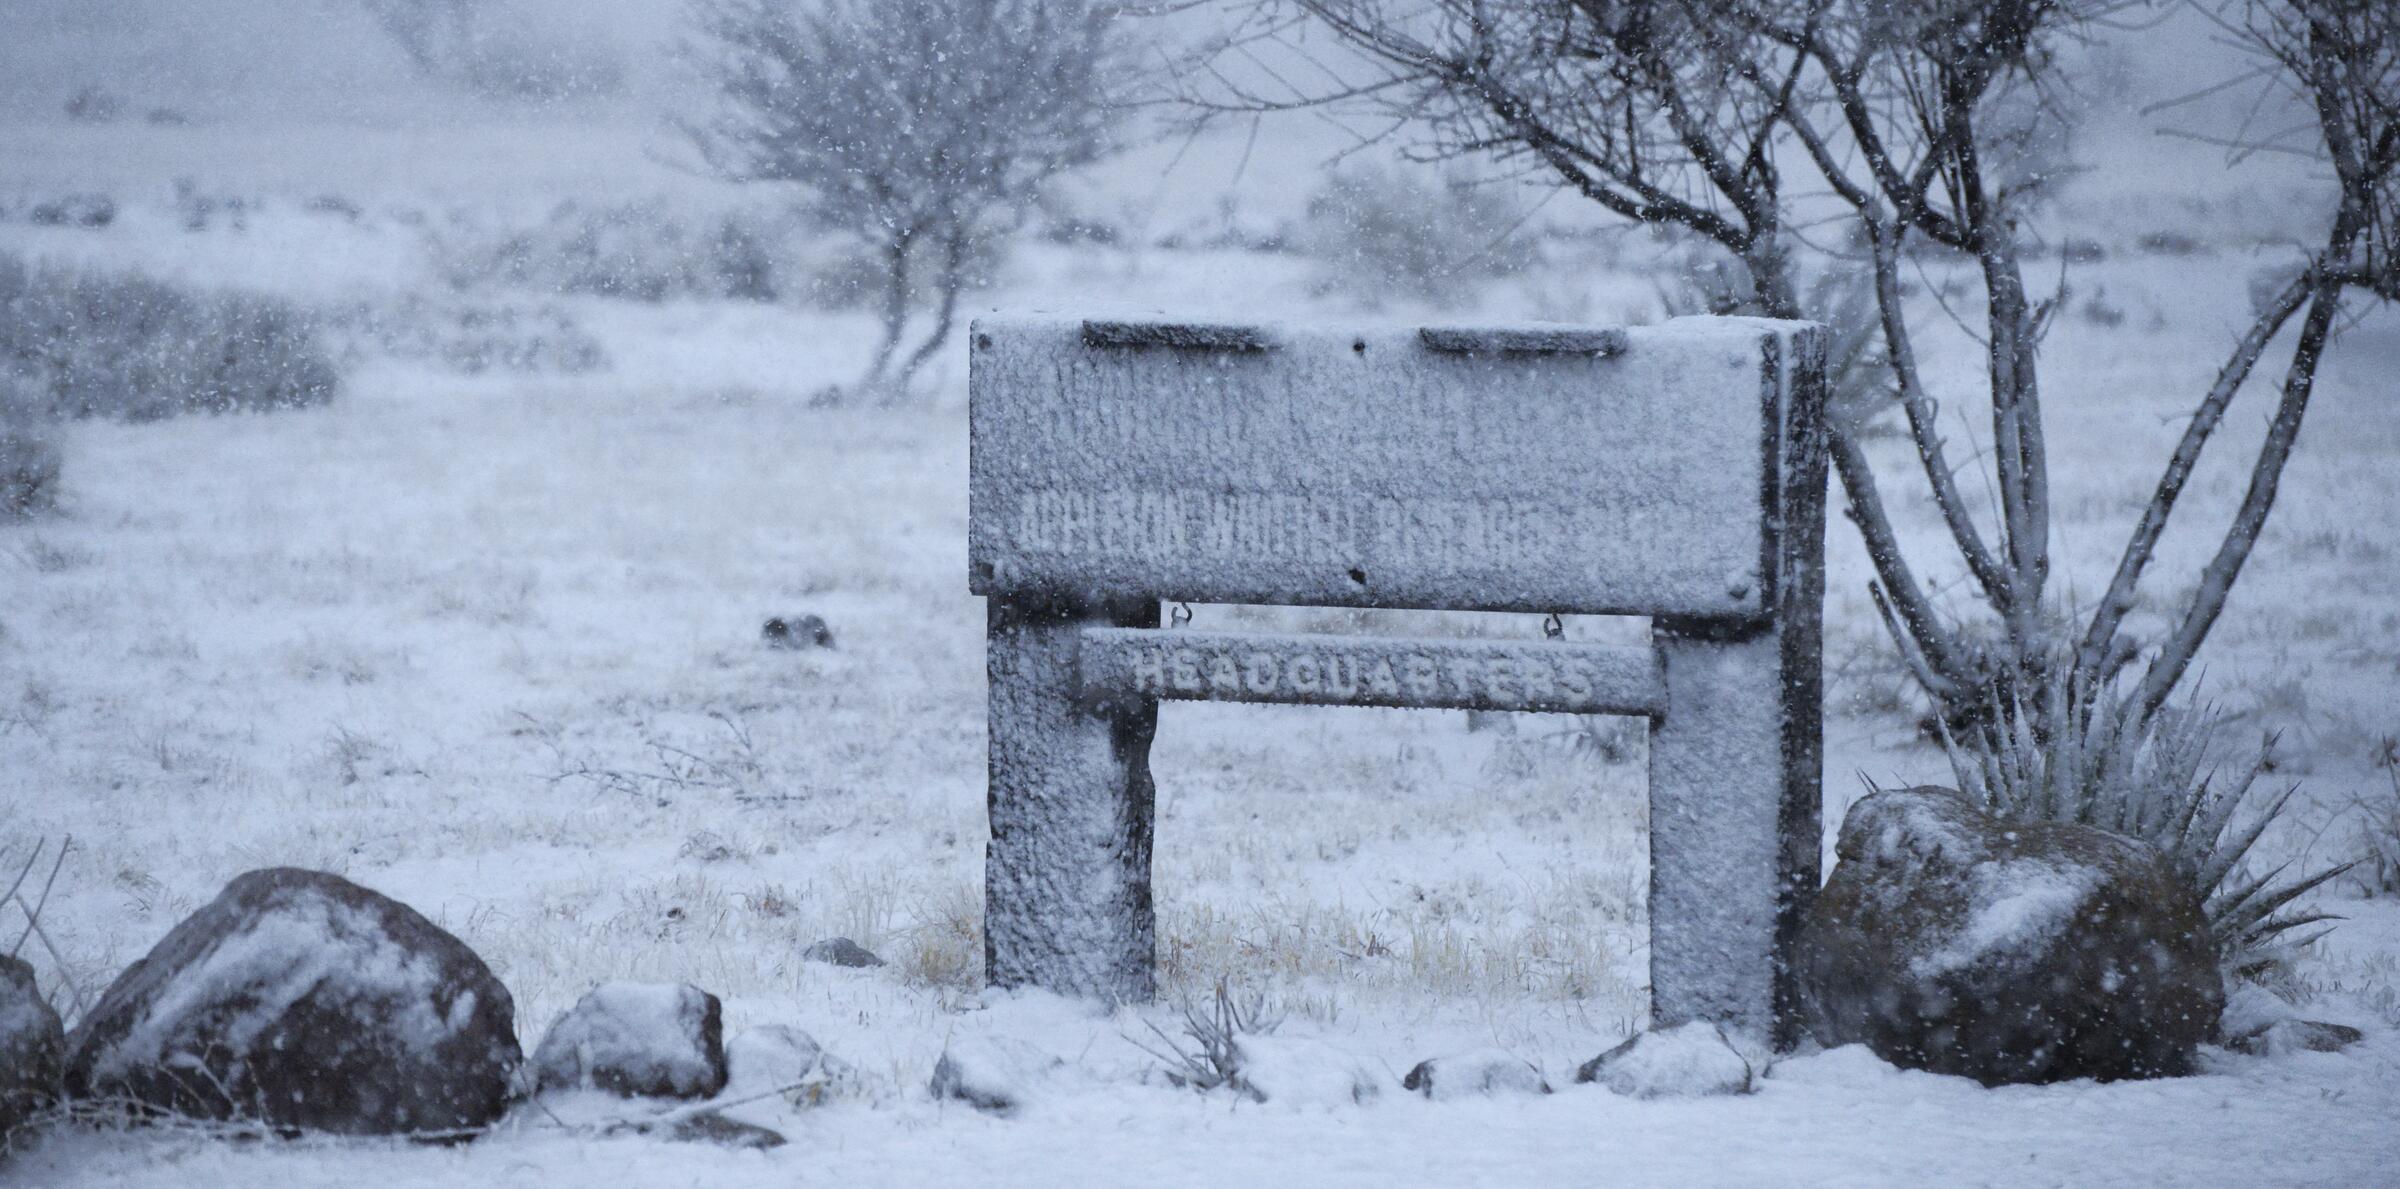 The wooden Appleton-Whittell Research Ranch Headquarters sign covered in snow and ice after an overnight winter storm.